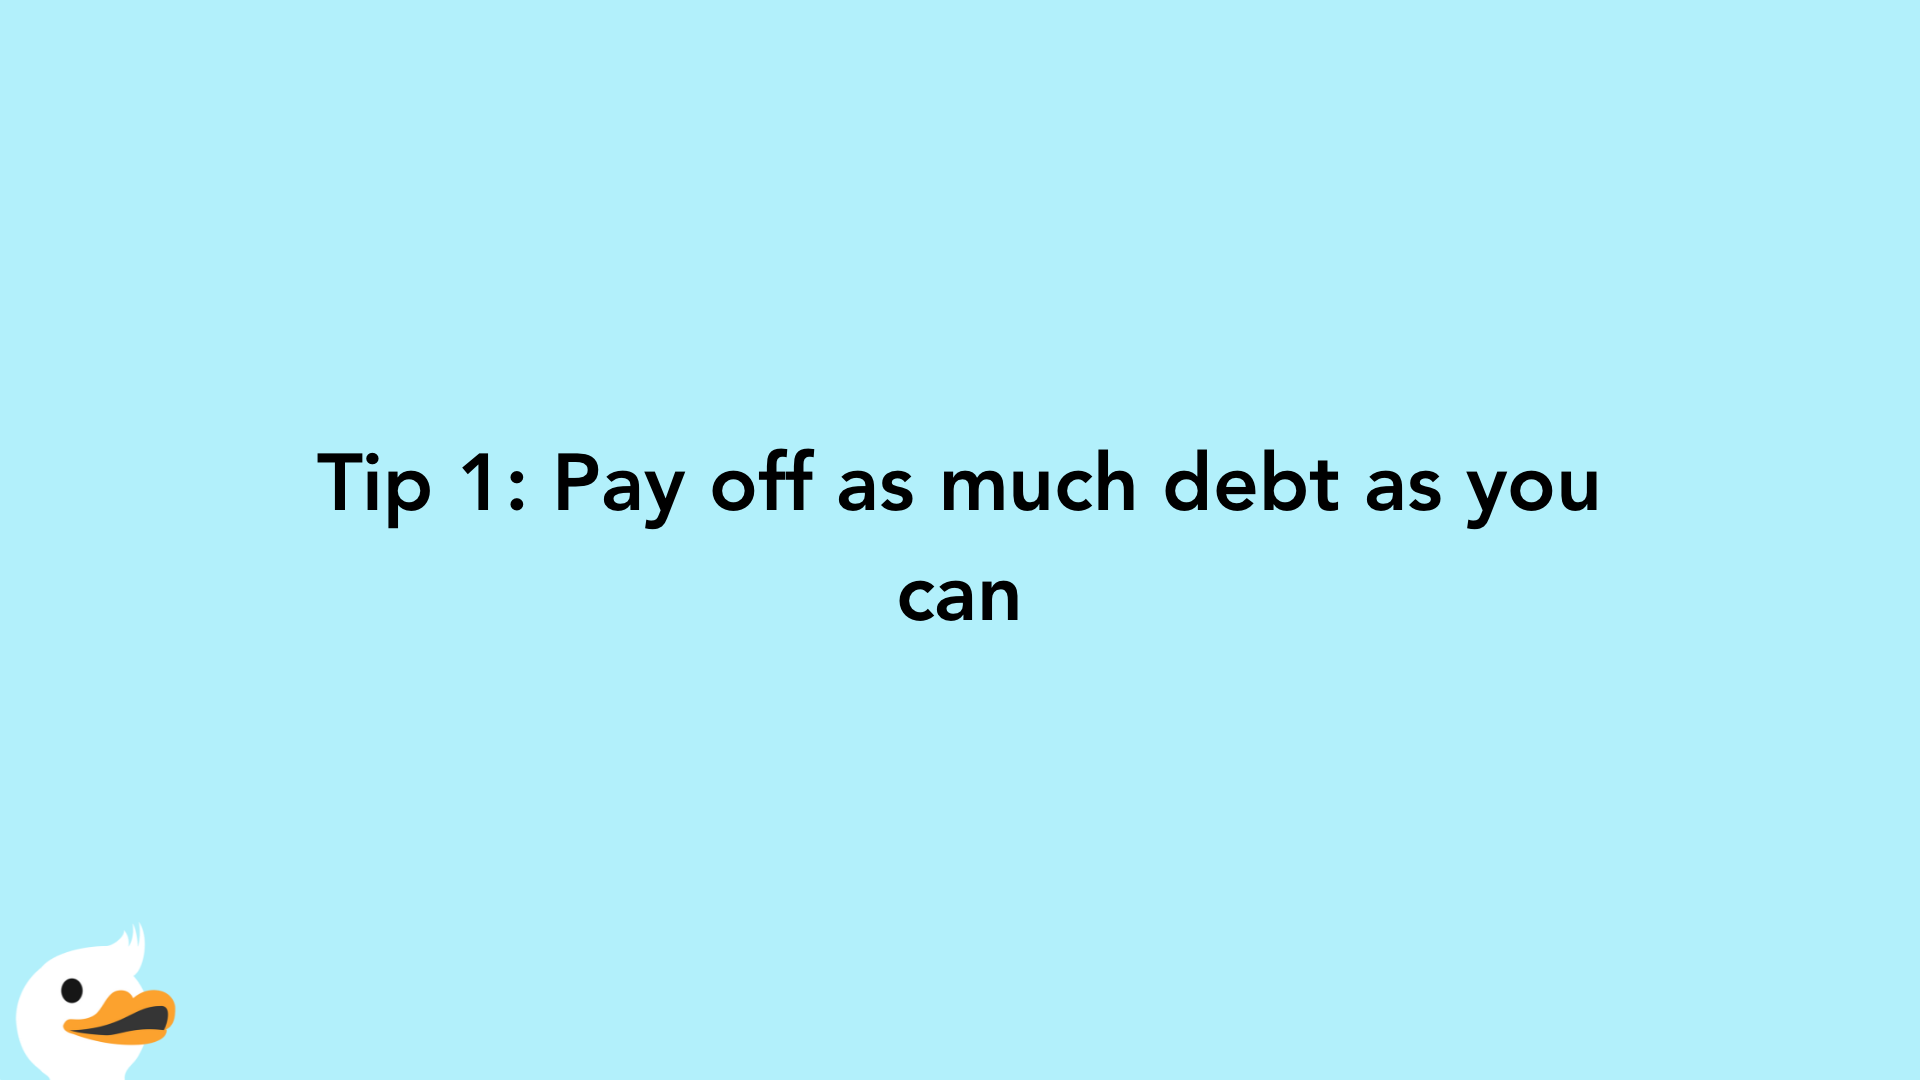 Tip 1: Pay off as much debt as you can